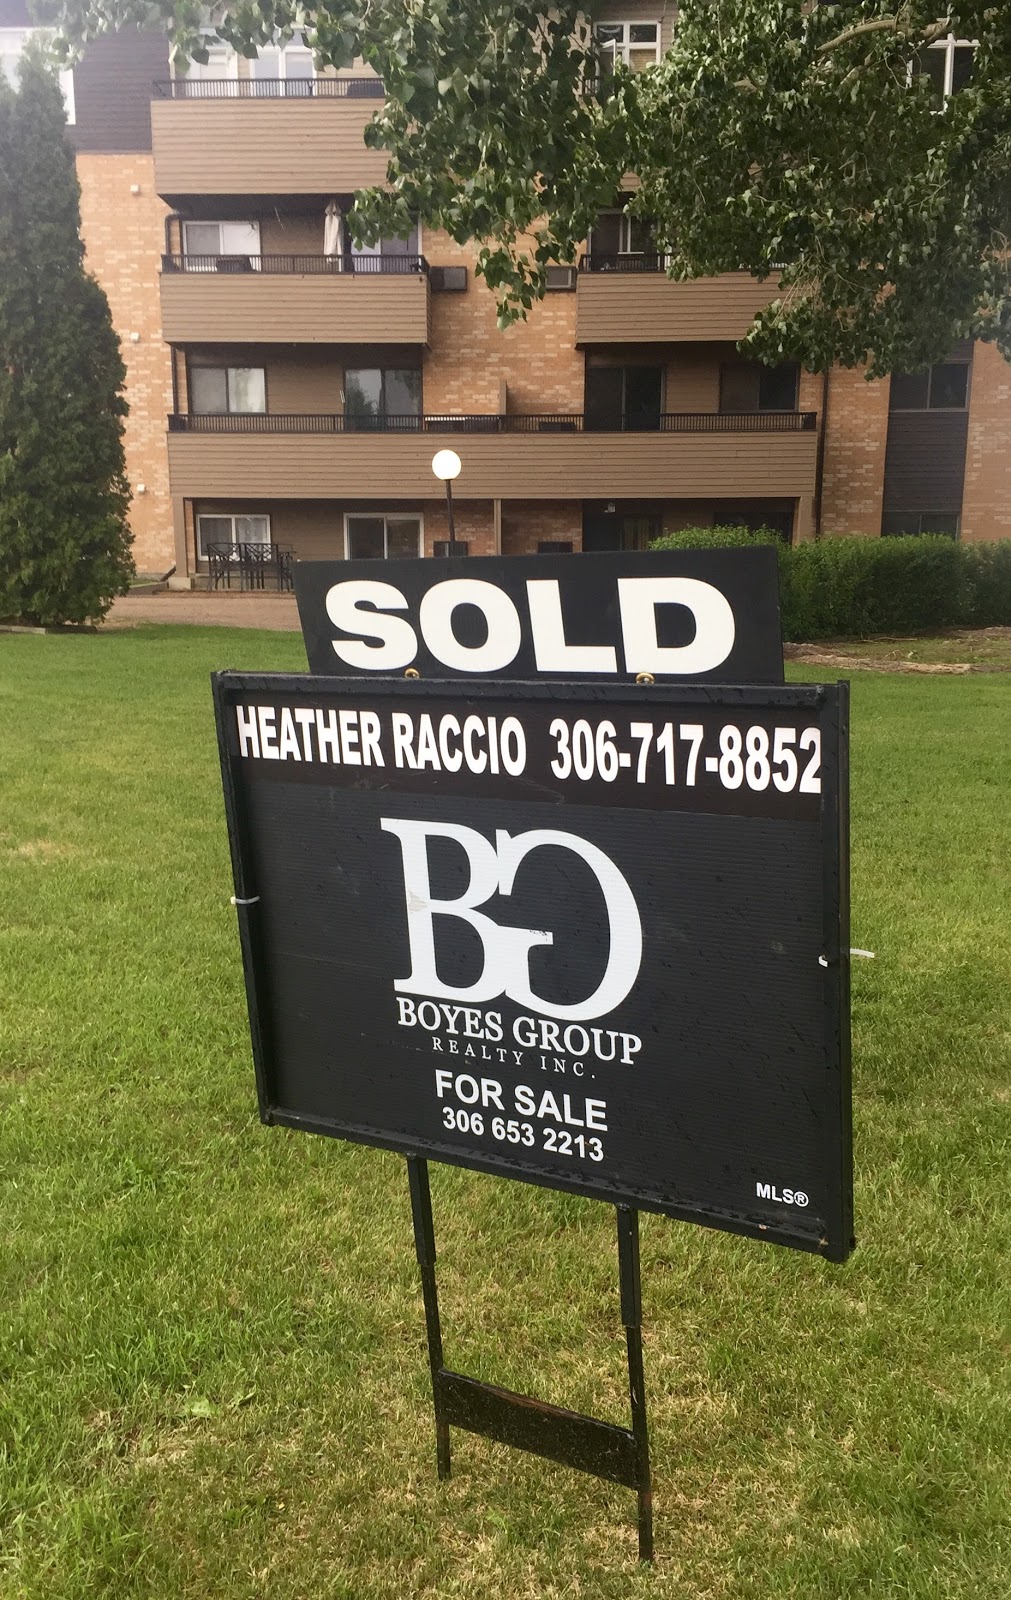 Heather Raccio - Real Estate Agent - Boyes Group Realty Inc. | real estate agency | 714 Duchess St, Saskatoon, SK S7K 0R3, Canada | 3067178852 OR +1 306-717-8852